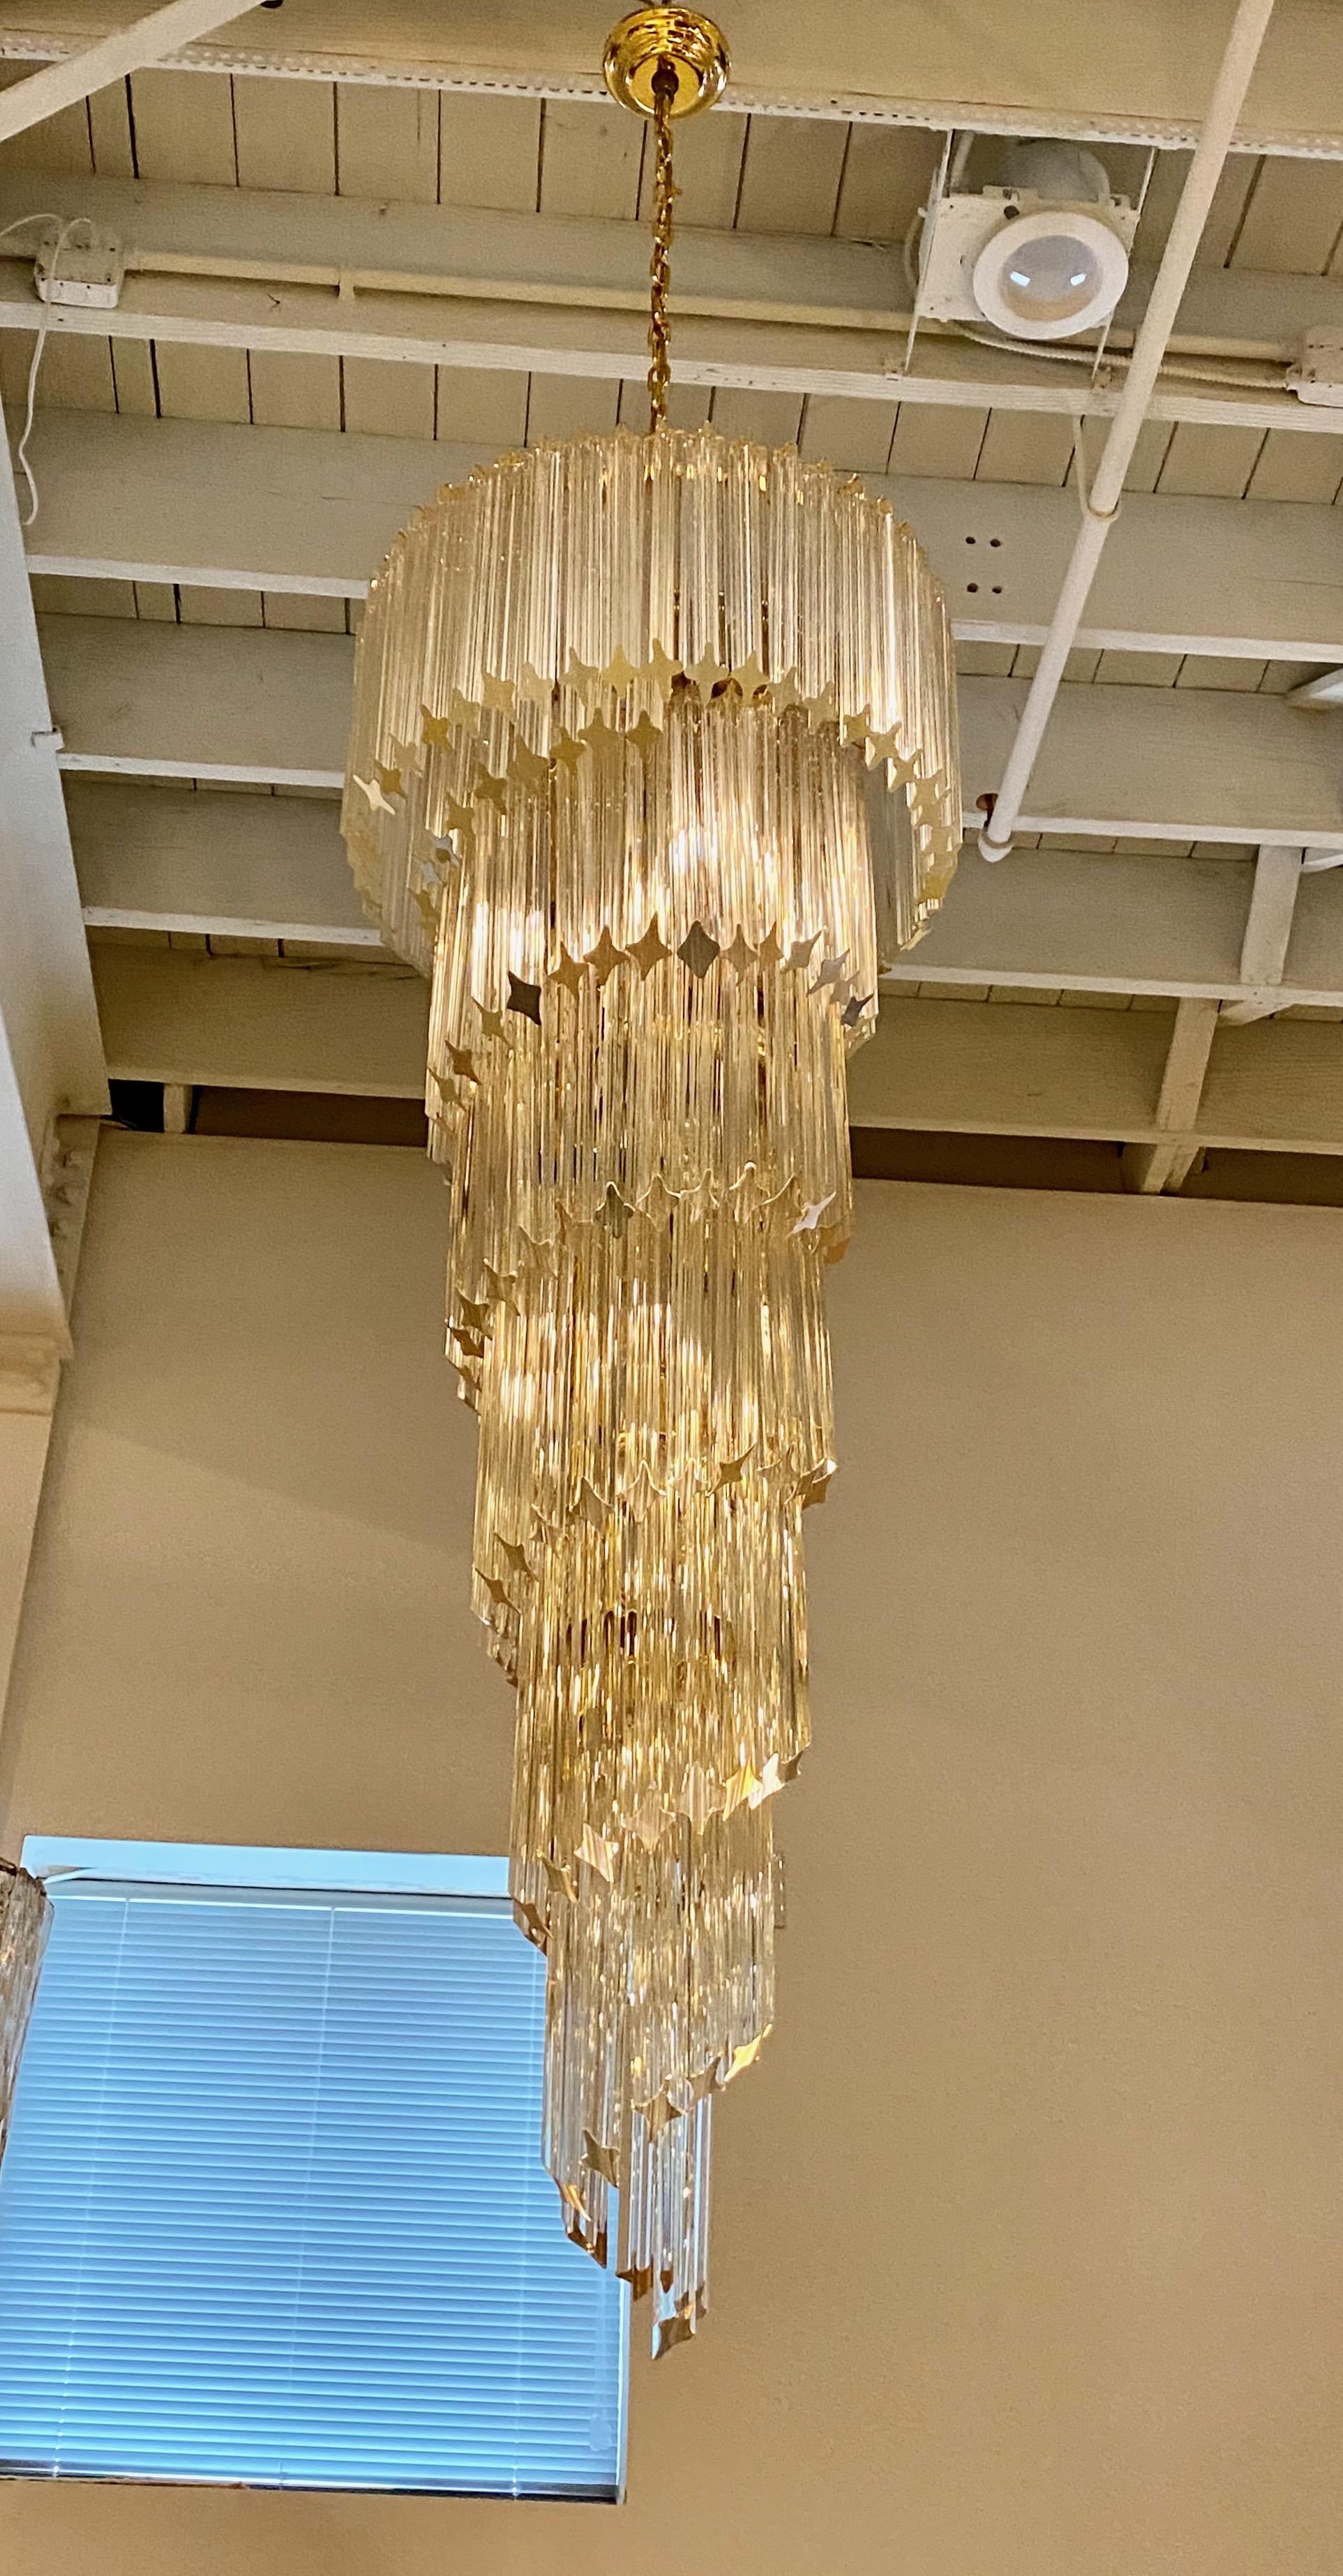 Stunning Mid-Century Modern Italian spiral chandelier. Each of the prisms are solid glass. They hang from hooks onto a spiral brass frame, as pictured. Any amount of chain can be added for custom hanging length of the chandelier. Has been rewired